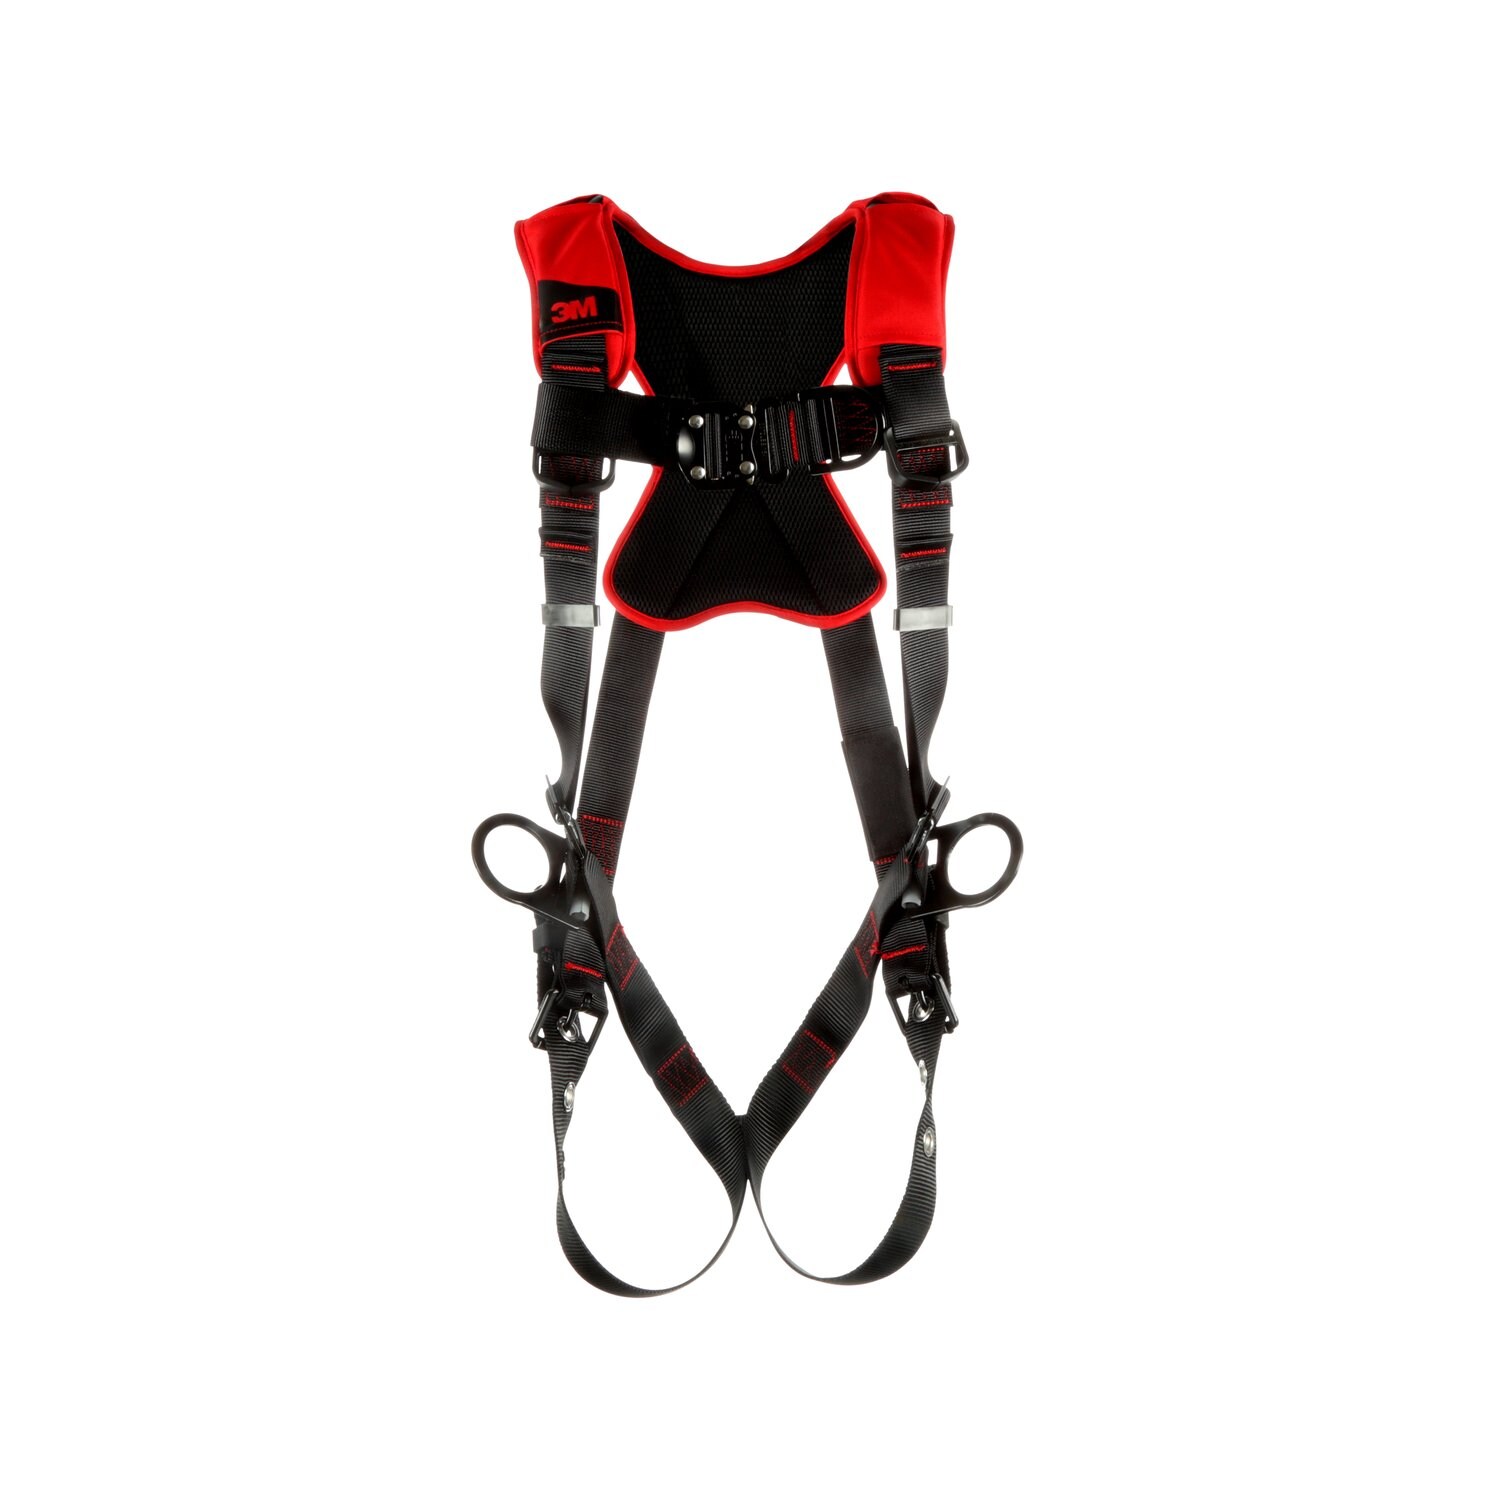 7012816724 - 3M Protecta P200 Comfort Vest Climbing/Positioning Safety Harness 1161441, X-Large